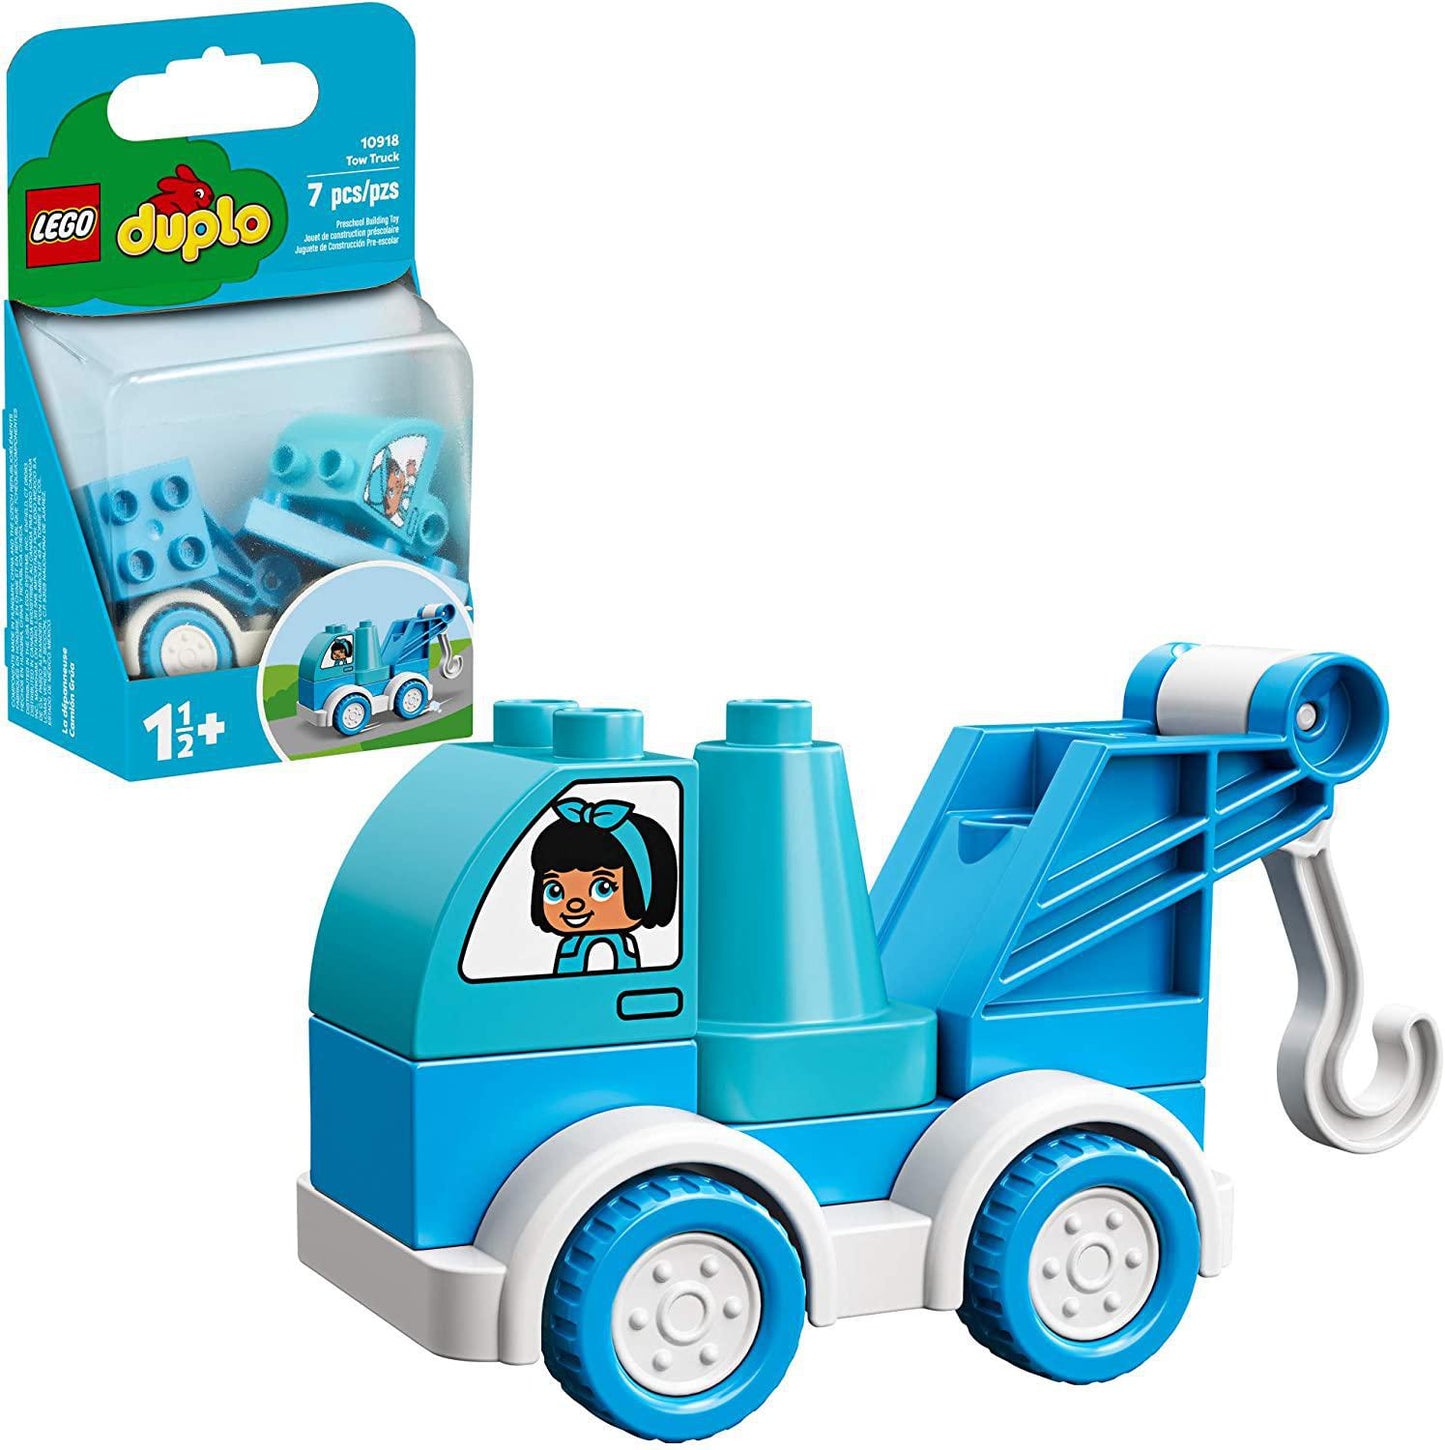 LEGO DUPLO My First Tow Truck 10918 Educational Tow Truck Toy, Great Gift for Kids Ages 1 1/2 and up, New 2020 (7 Pieces)